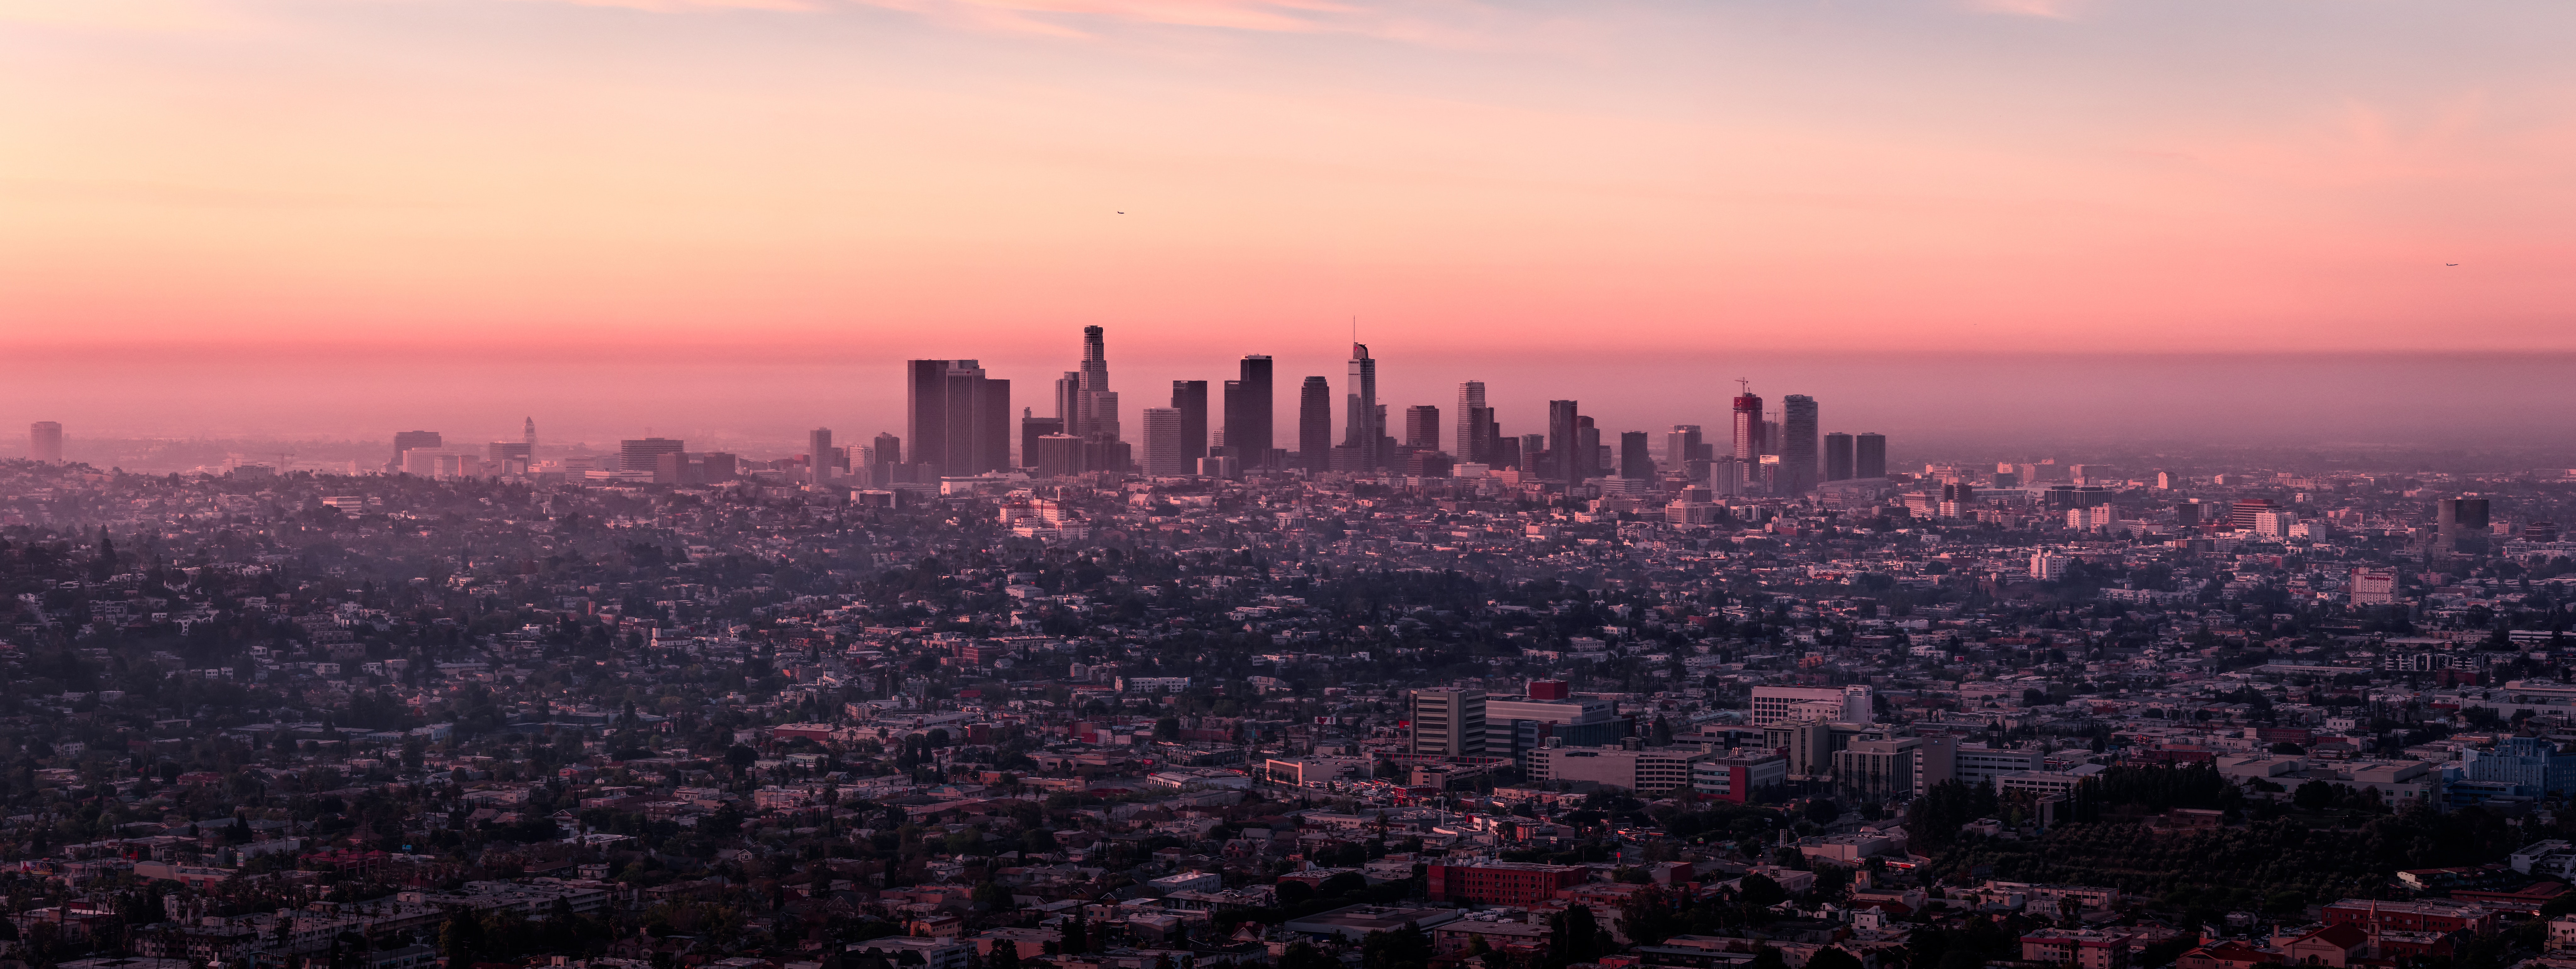 Photo by Martin Adams on Unsplash, A Beautiful Landscape Picture of Los Angeles